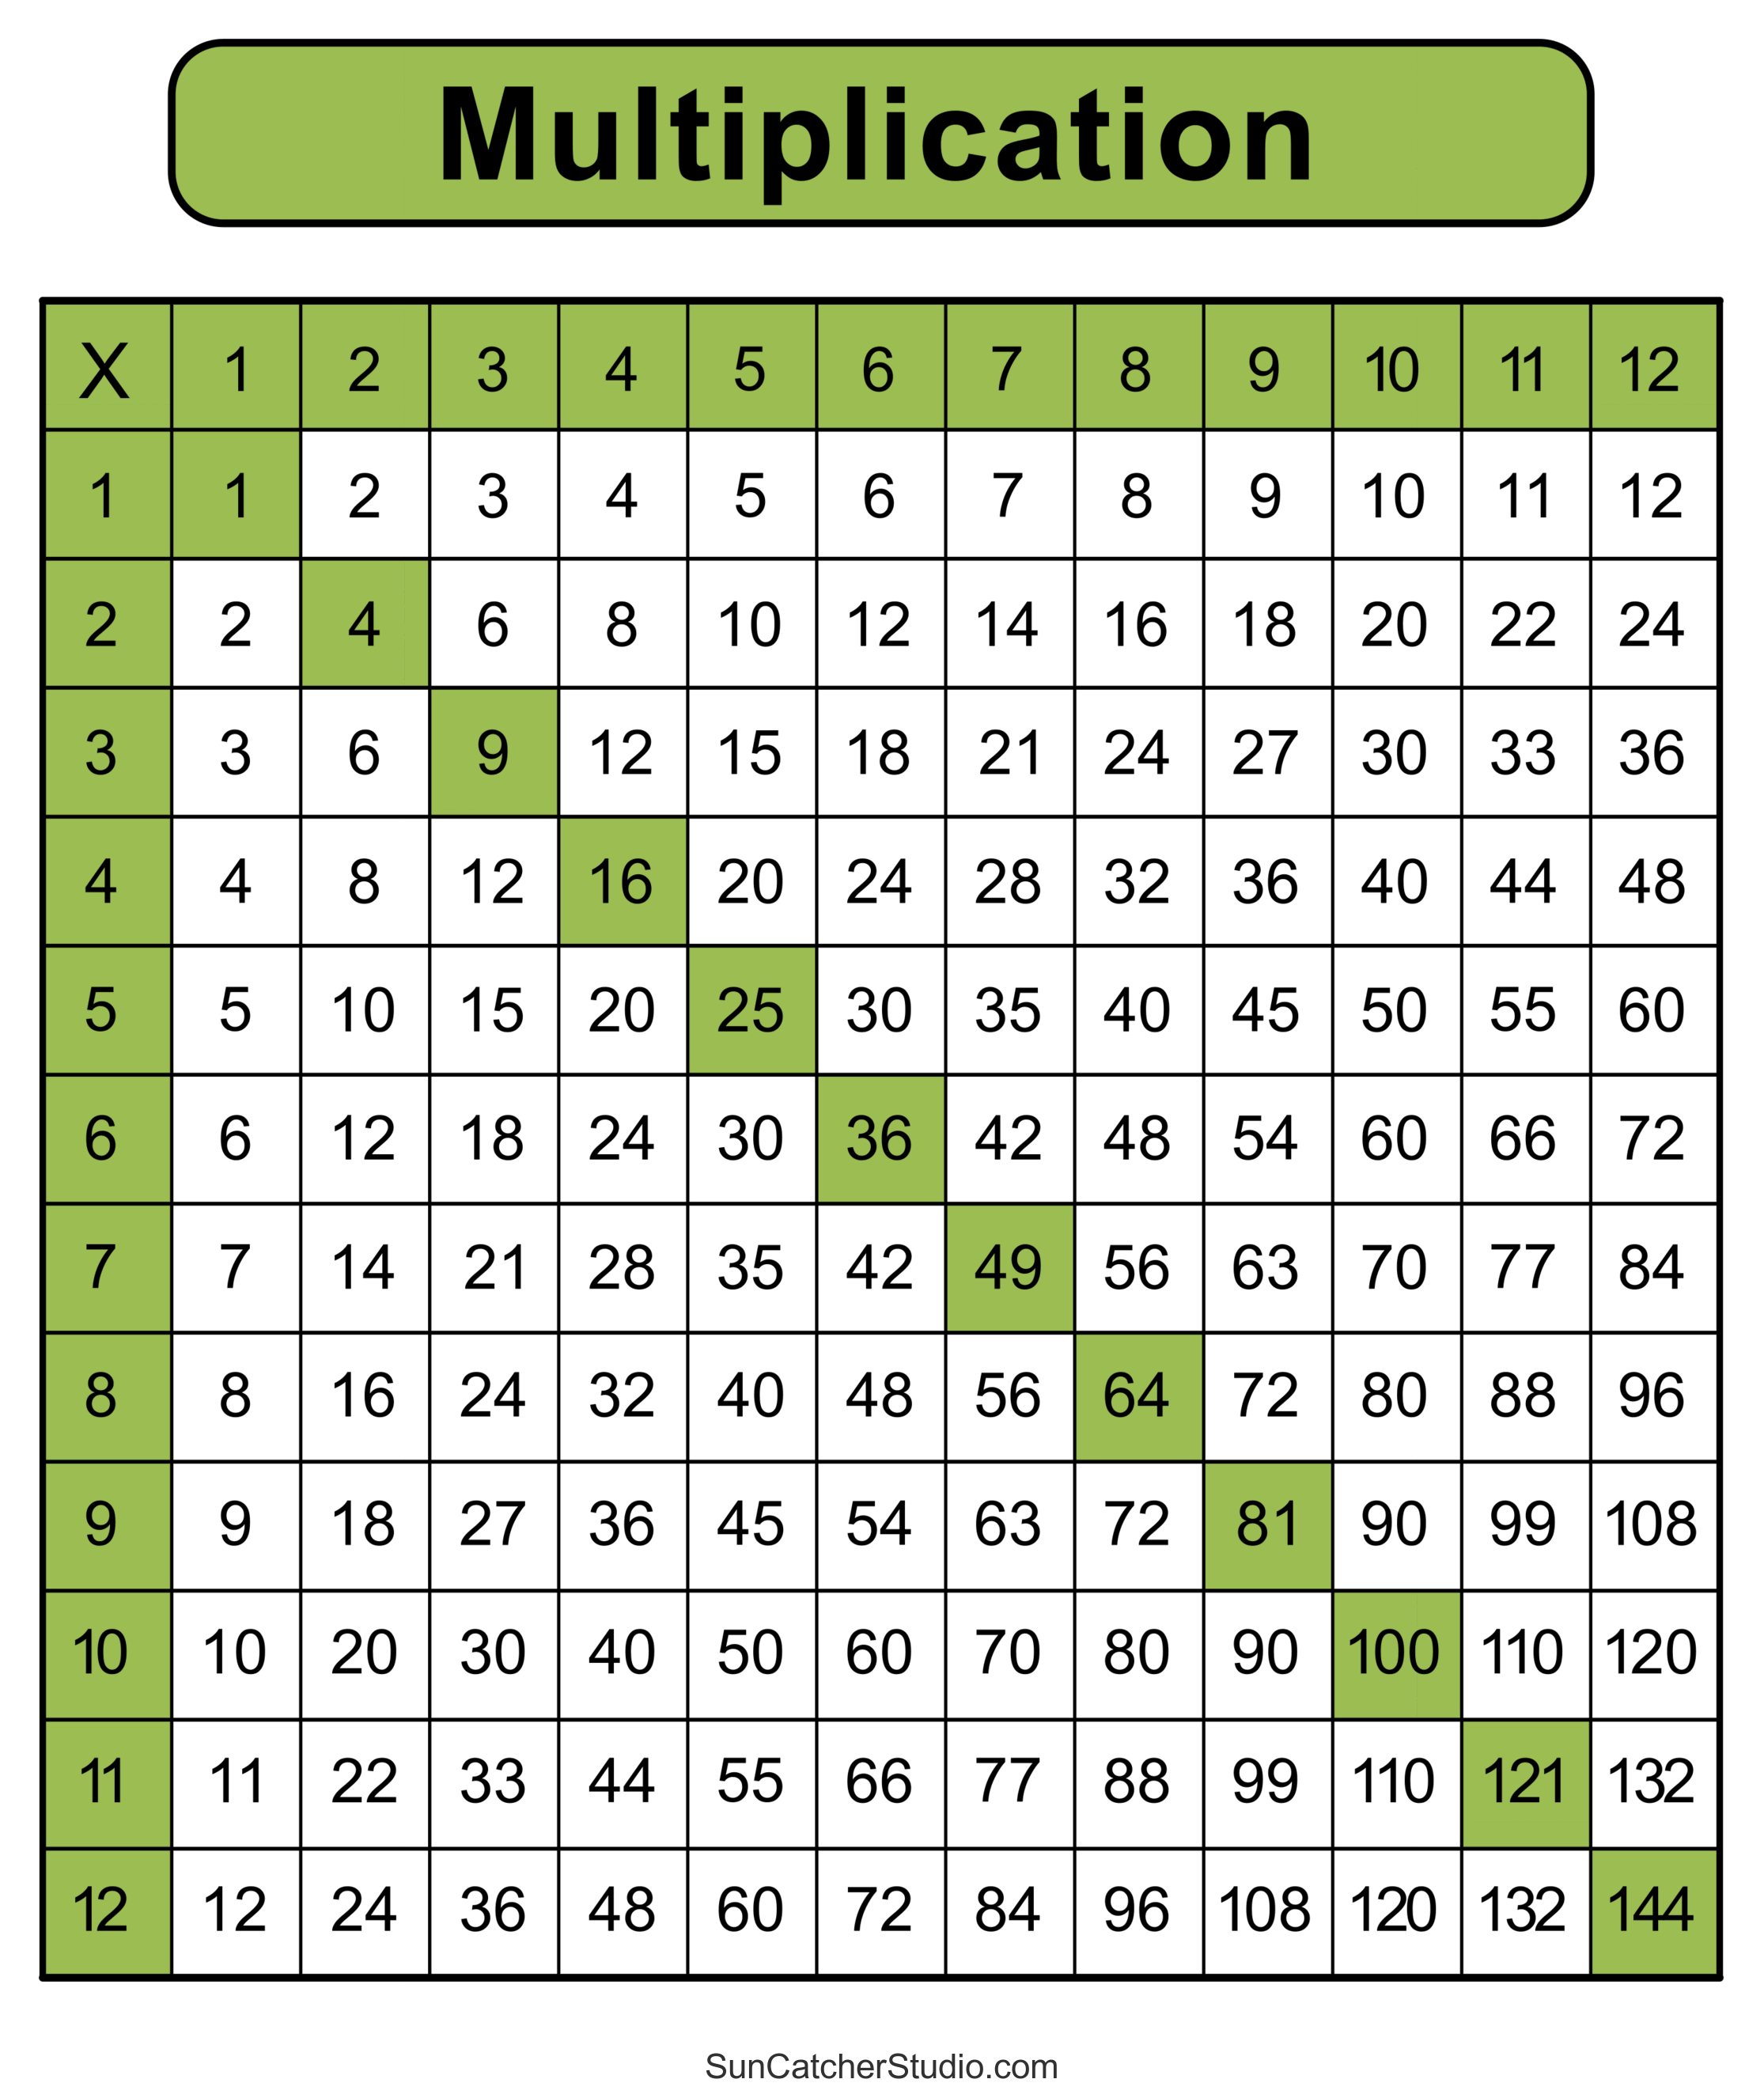 Multiplication Charts (PDF): Free Printable Times Tables DIY Projects